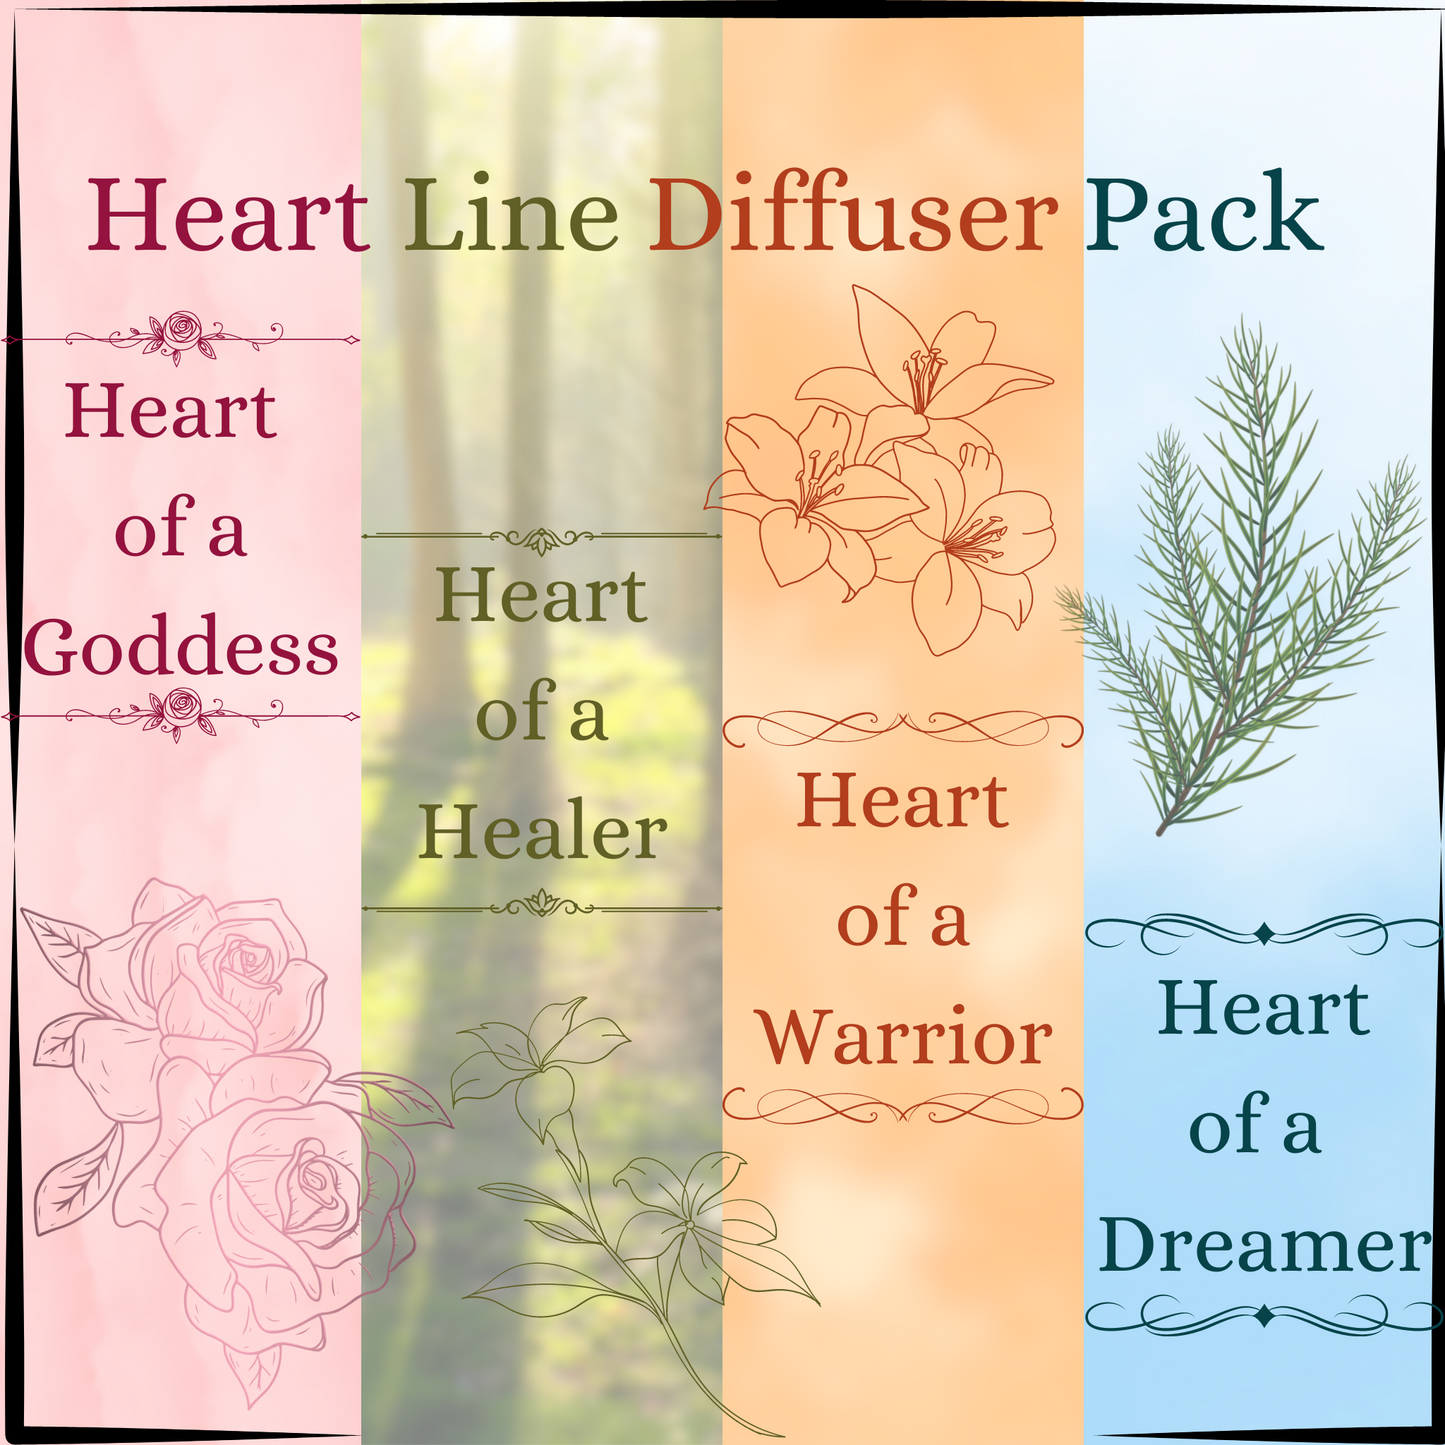 Heart Line Diffuser Pack